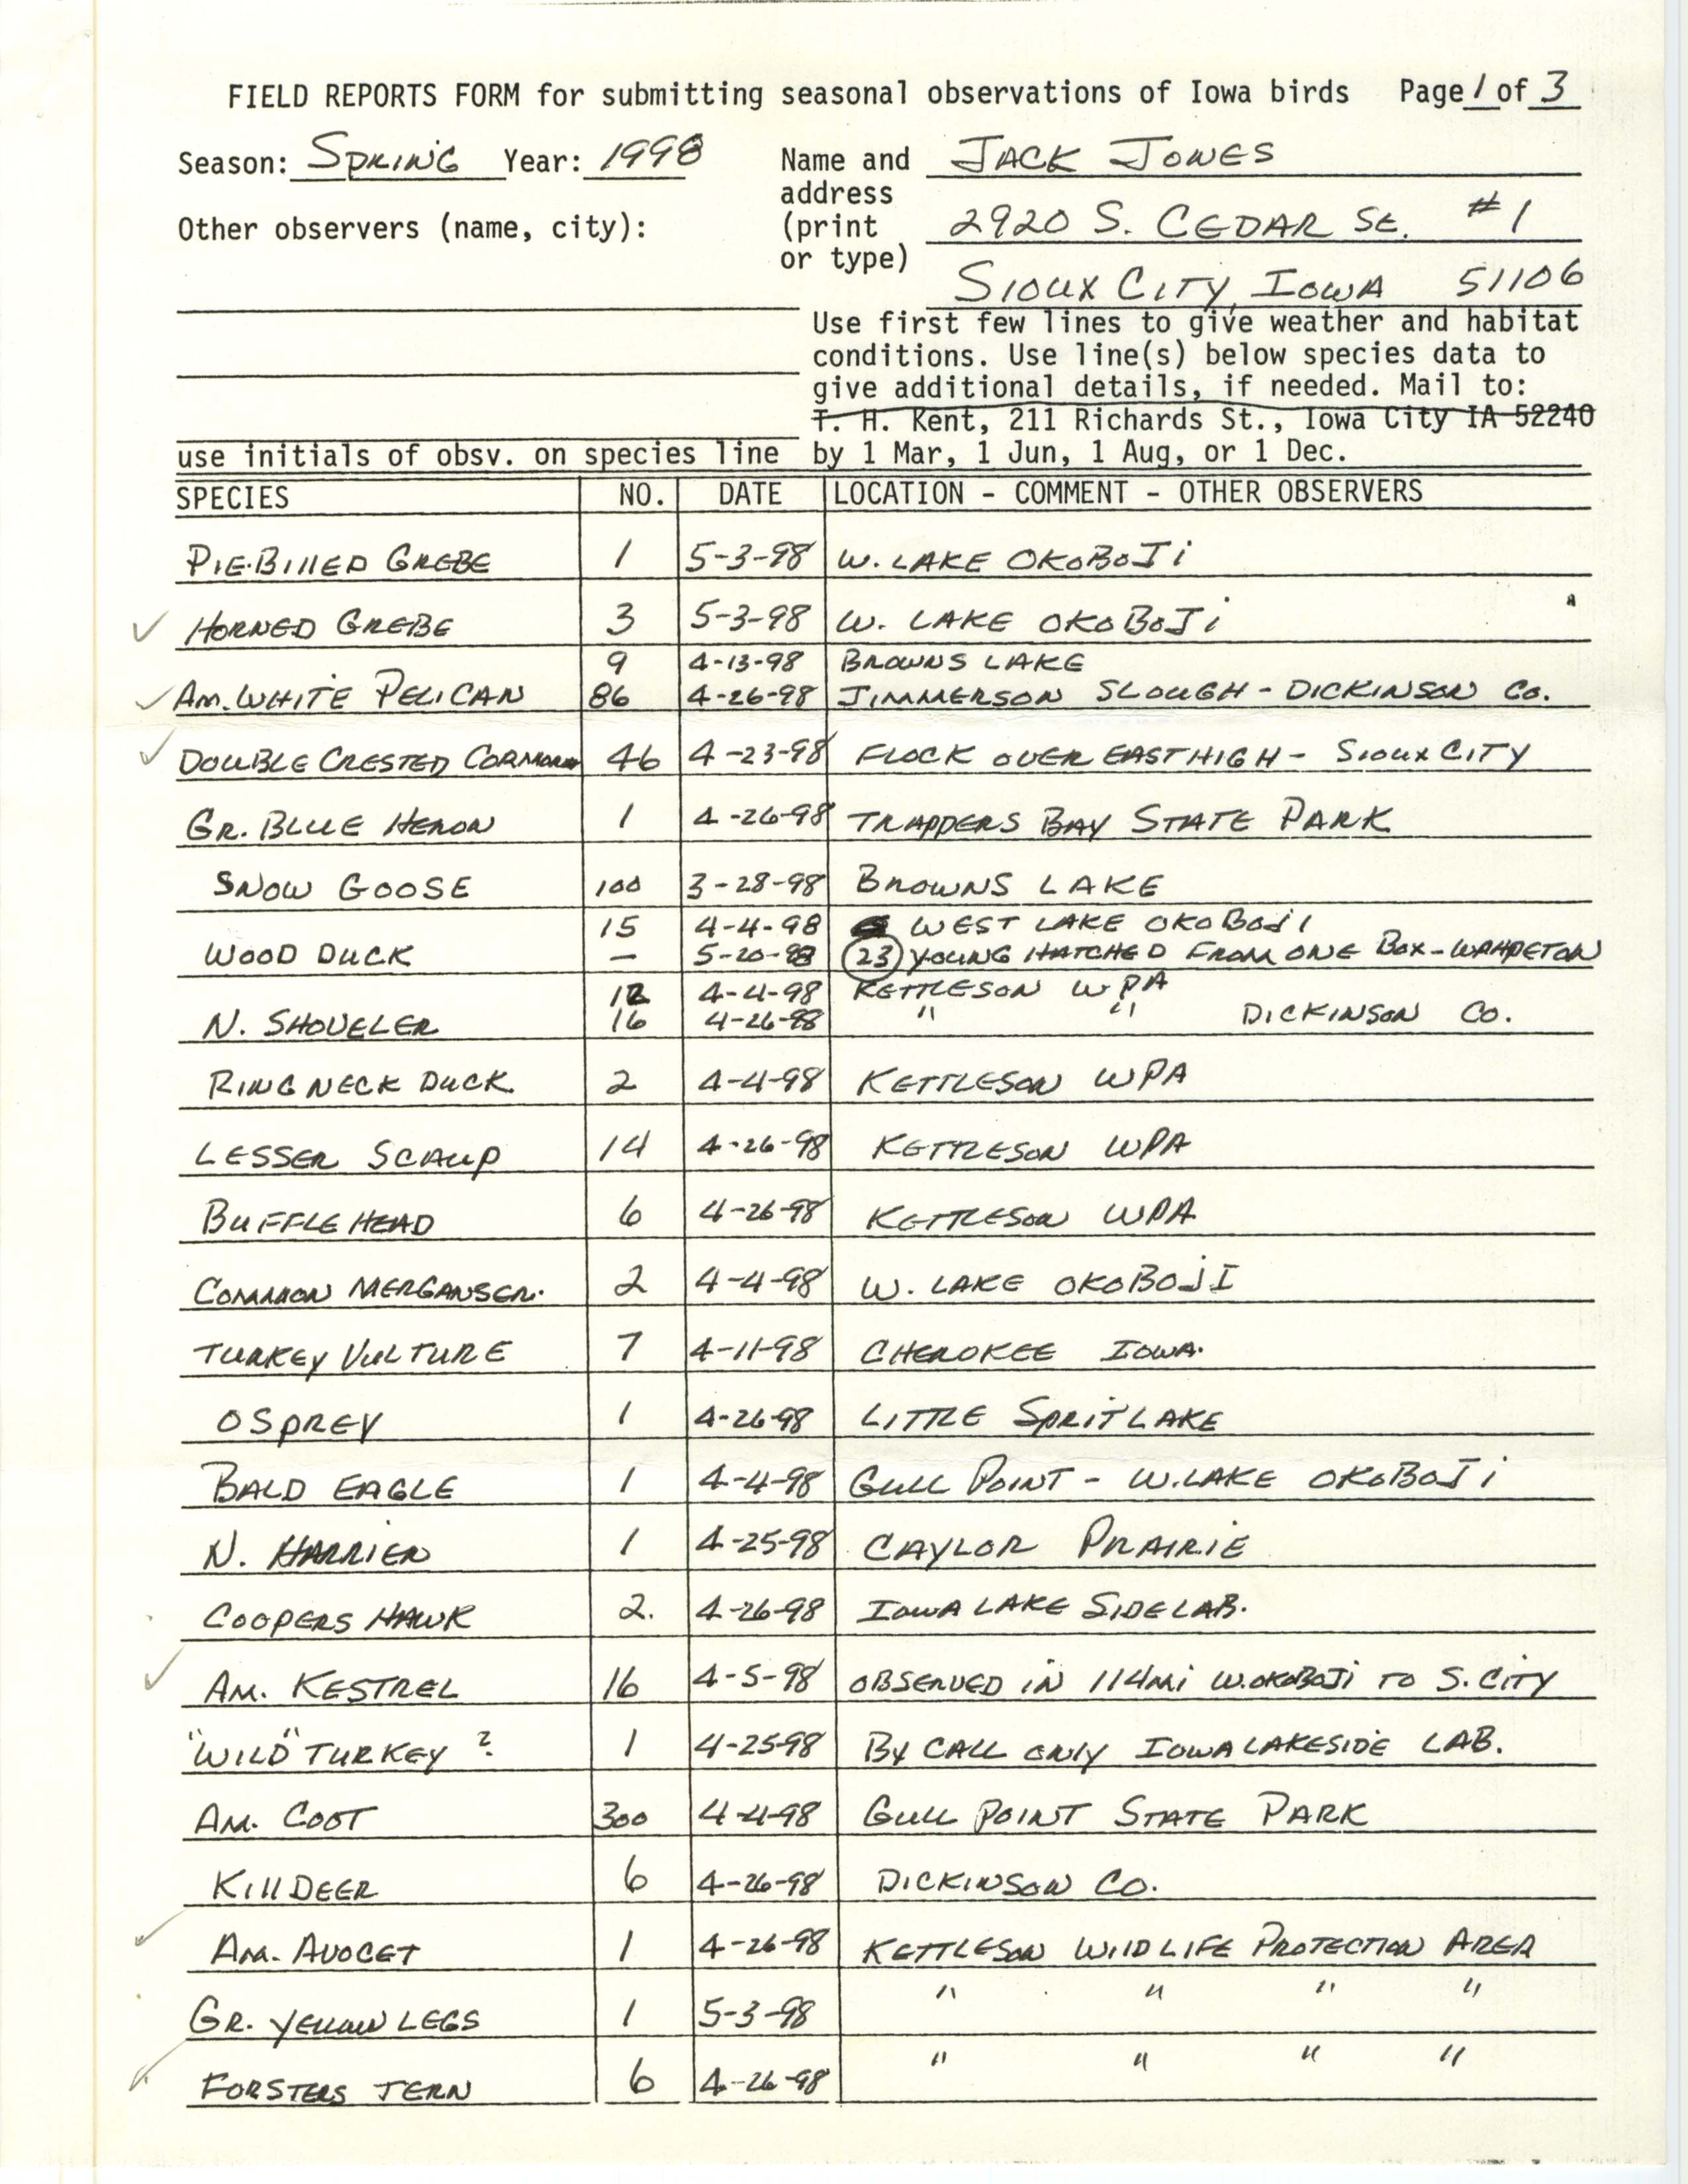 Field reports form for submitting seasonal observations of Iowa birds, Jack Jones, spring 1998